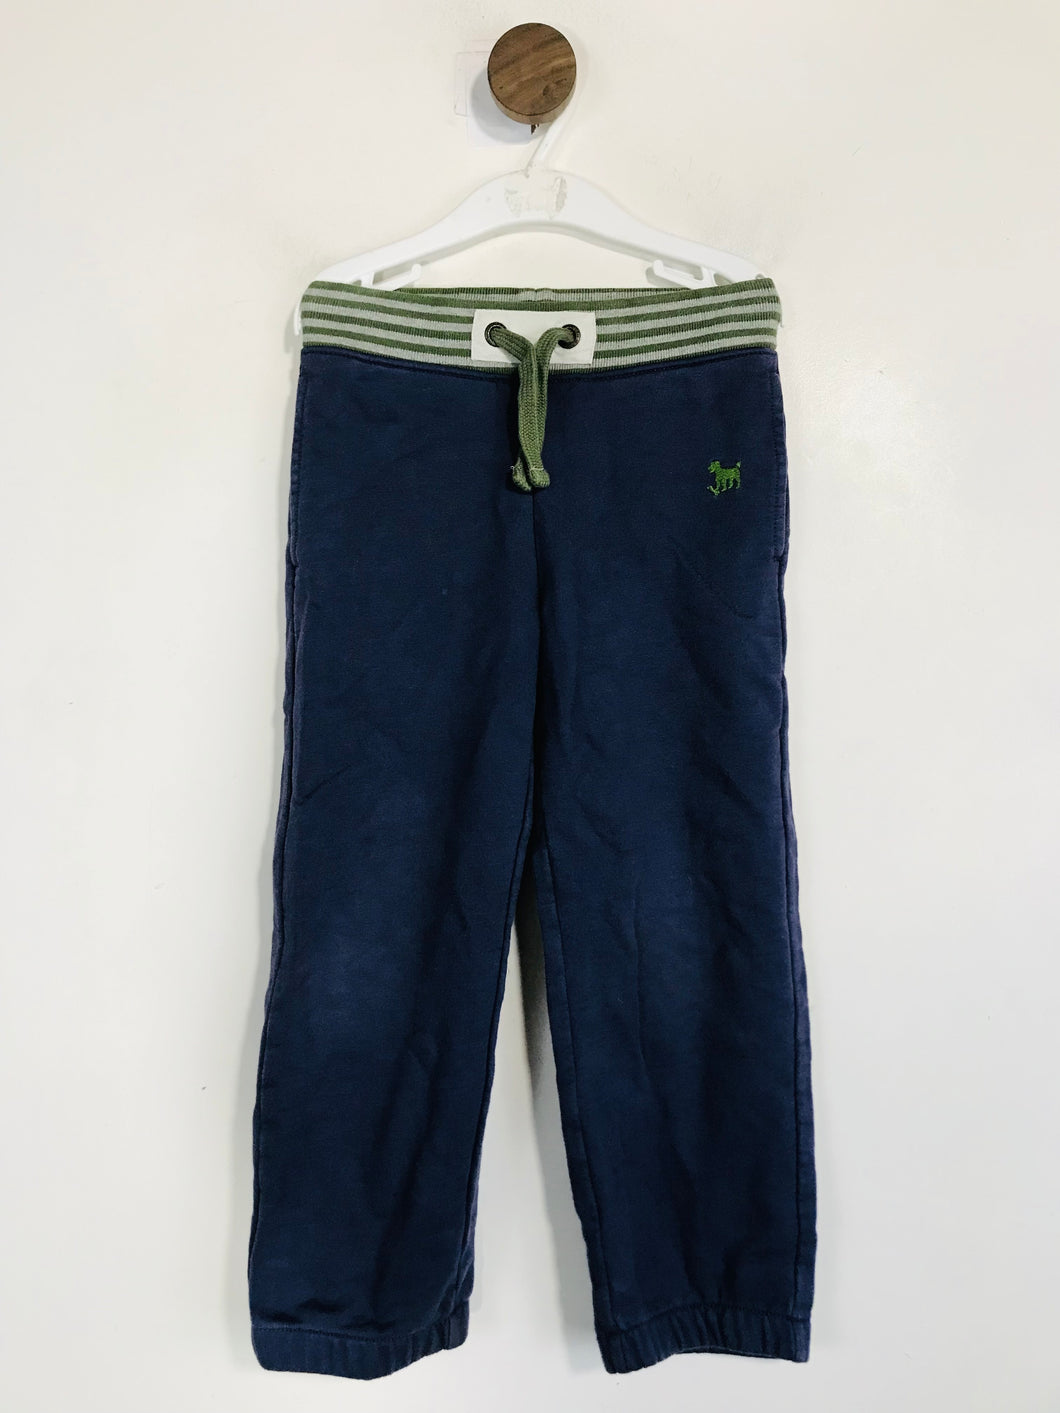 Boden Kid's Tracksuit Sports Bottoms | 4 Years | Blue